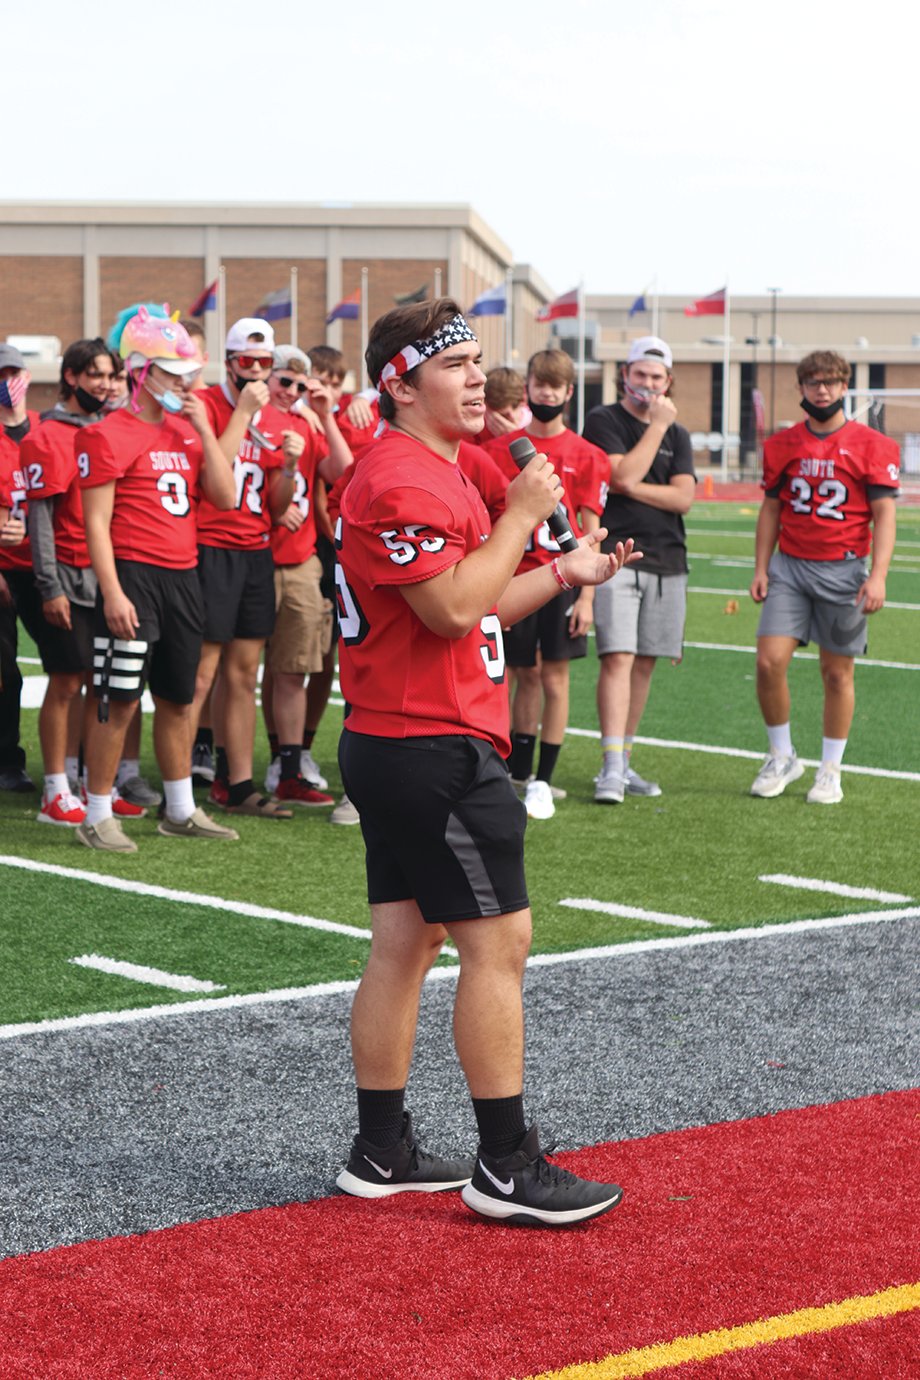 Southmont senior linebacker Riley Woodall provides a few words of inspiration ahead of Friday's Homecoming matchup with Lebanon.